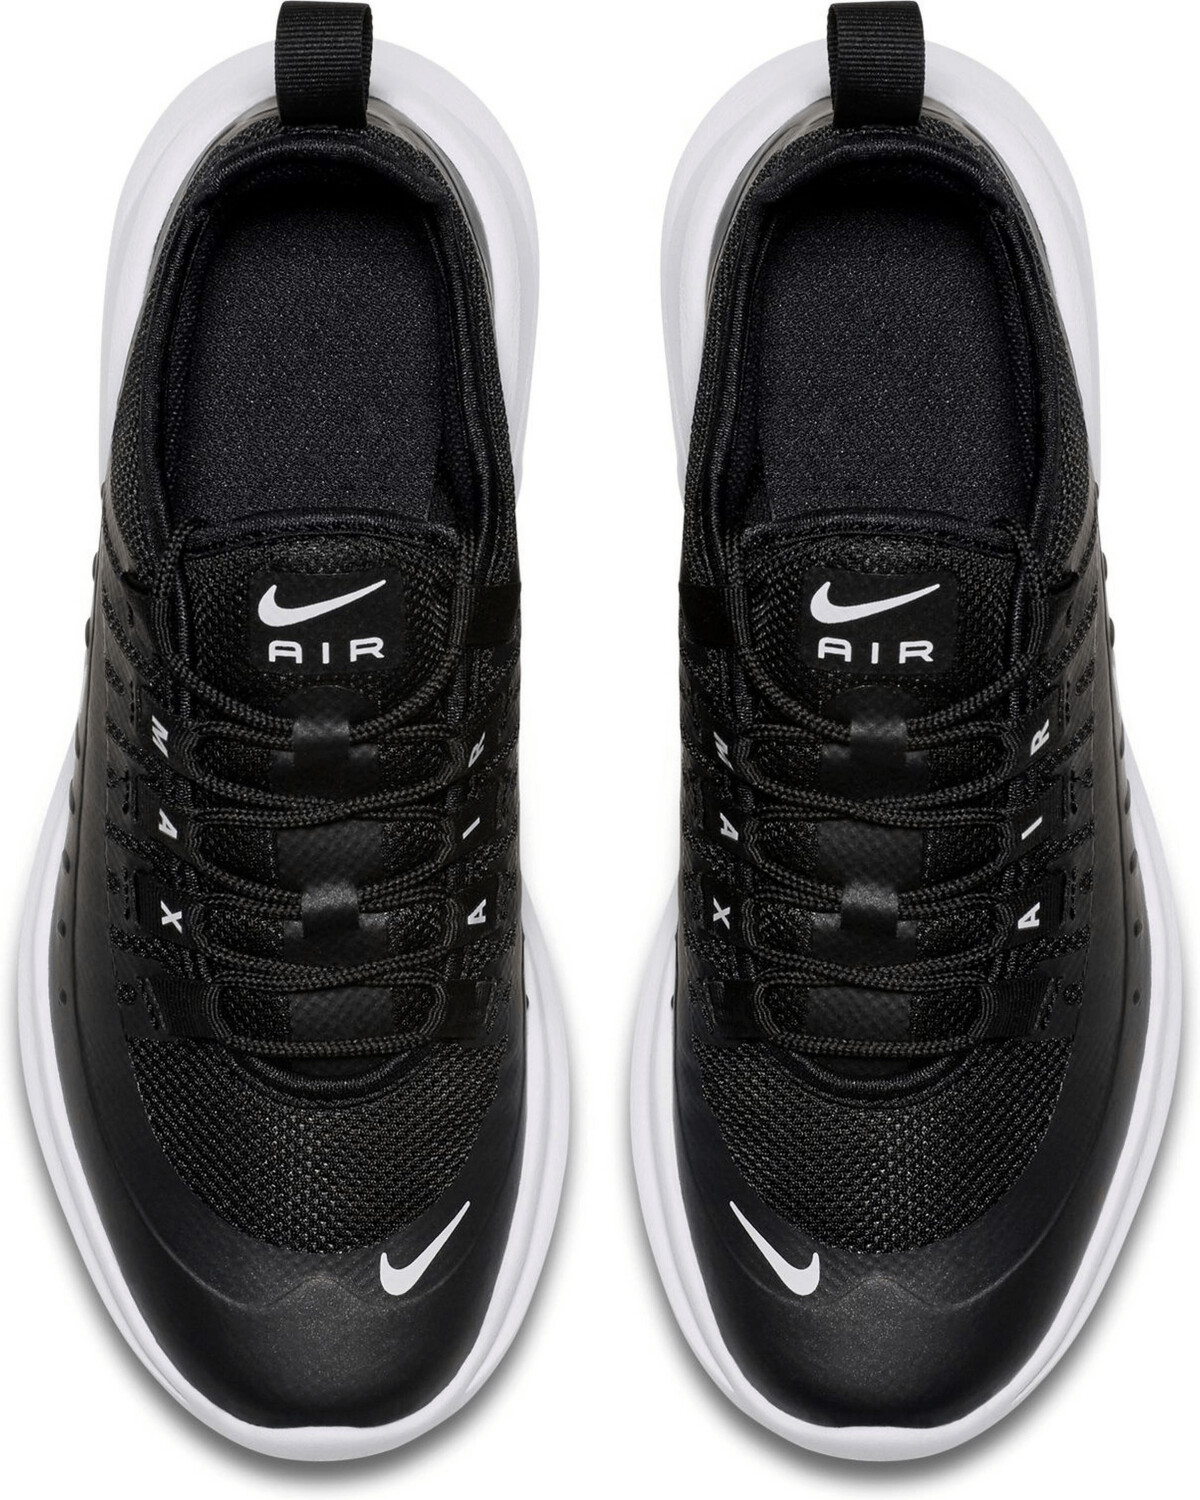 Buy Nike Air Max Axis GS Black/White from £52.99 (Today) – Best Deals ...